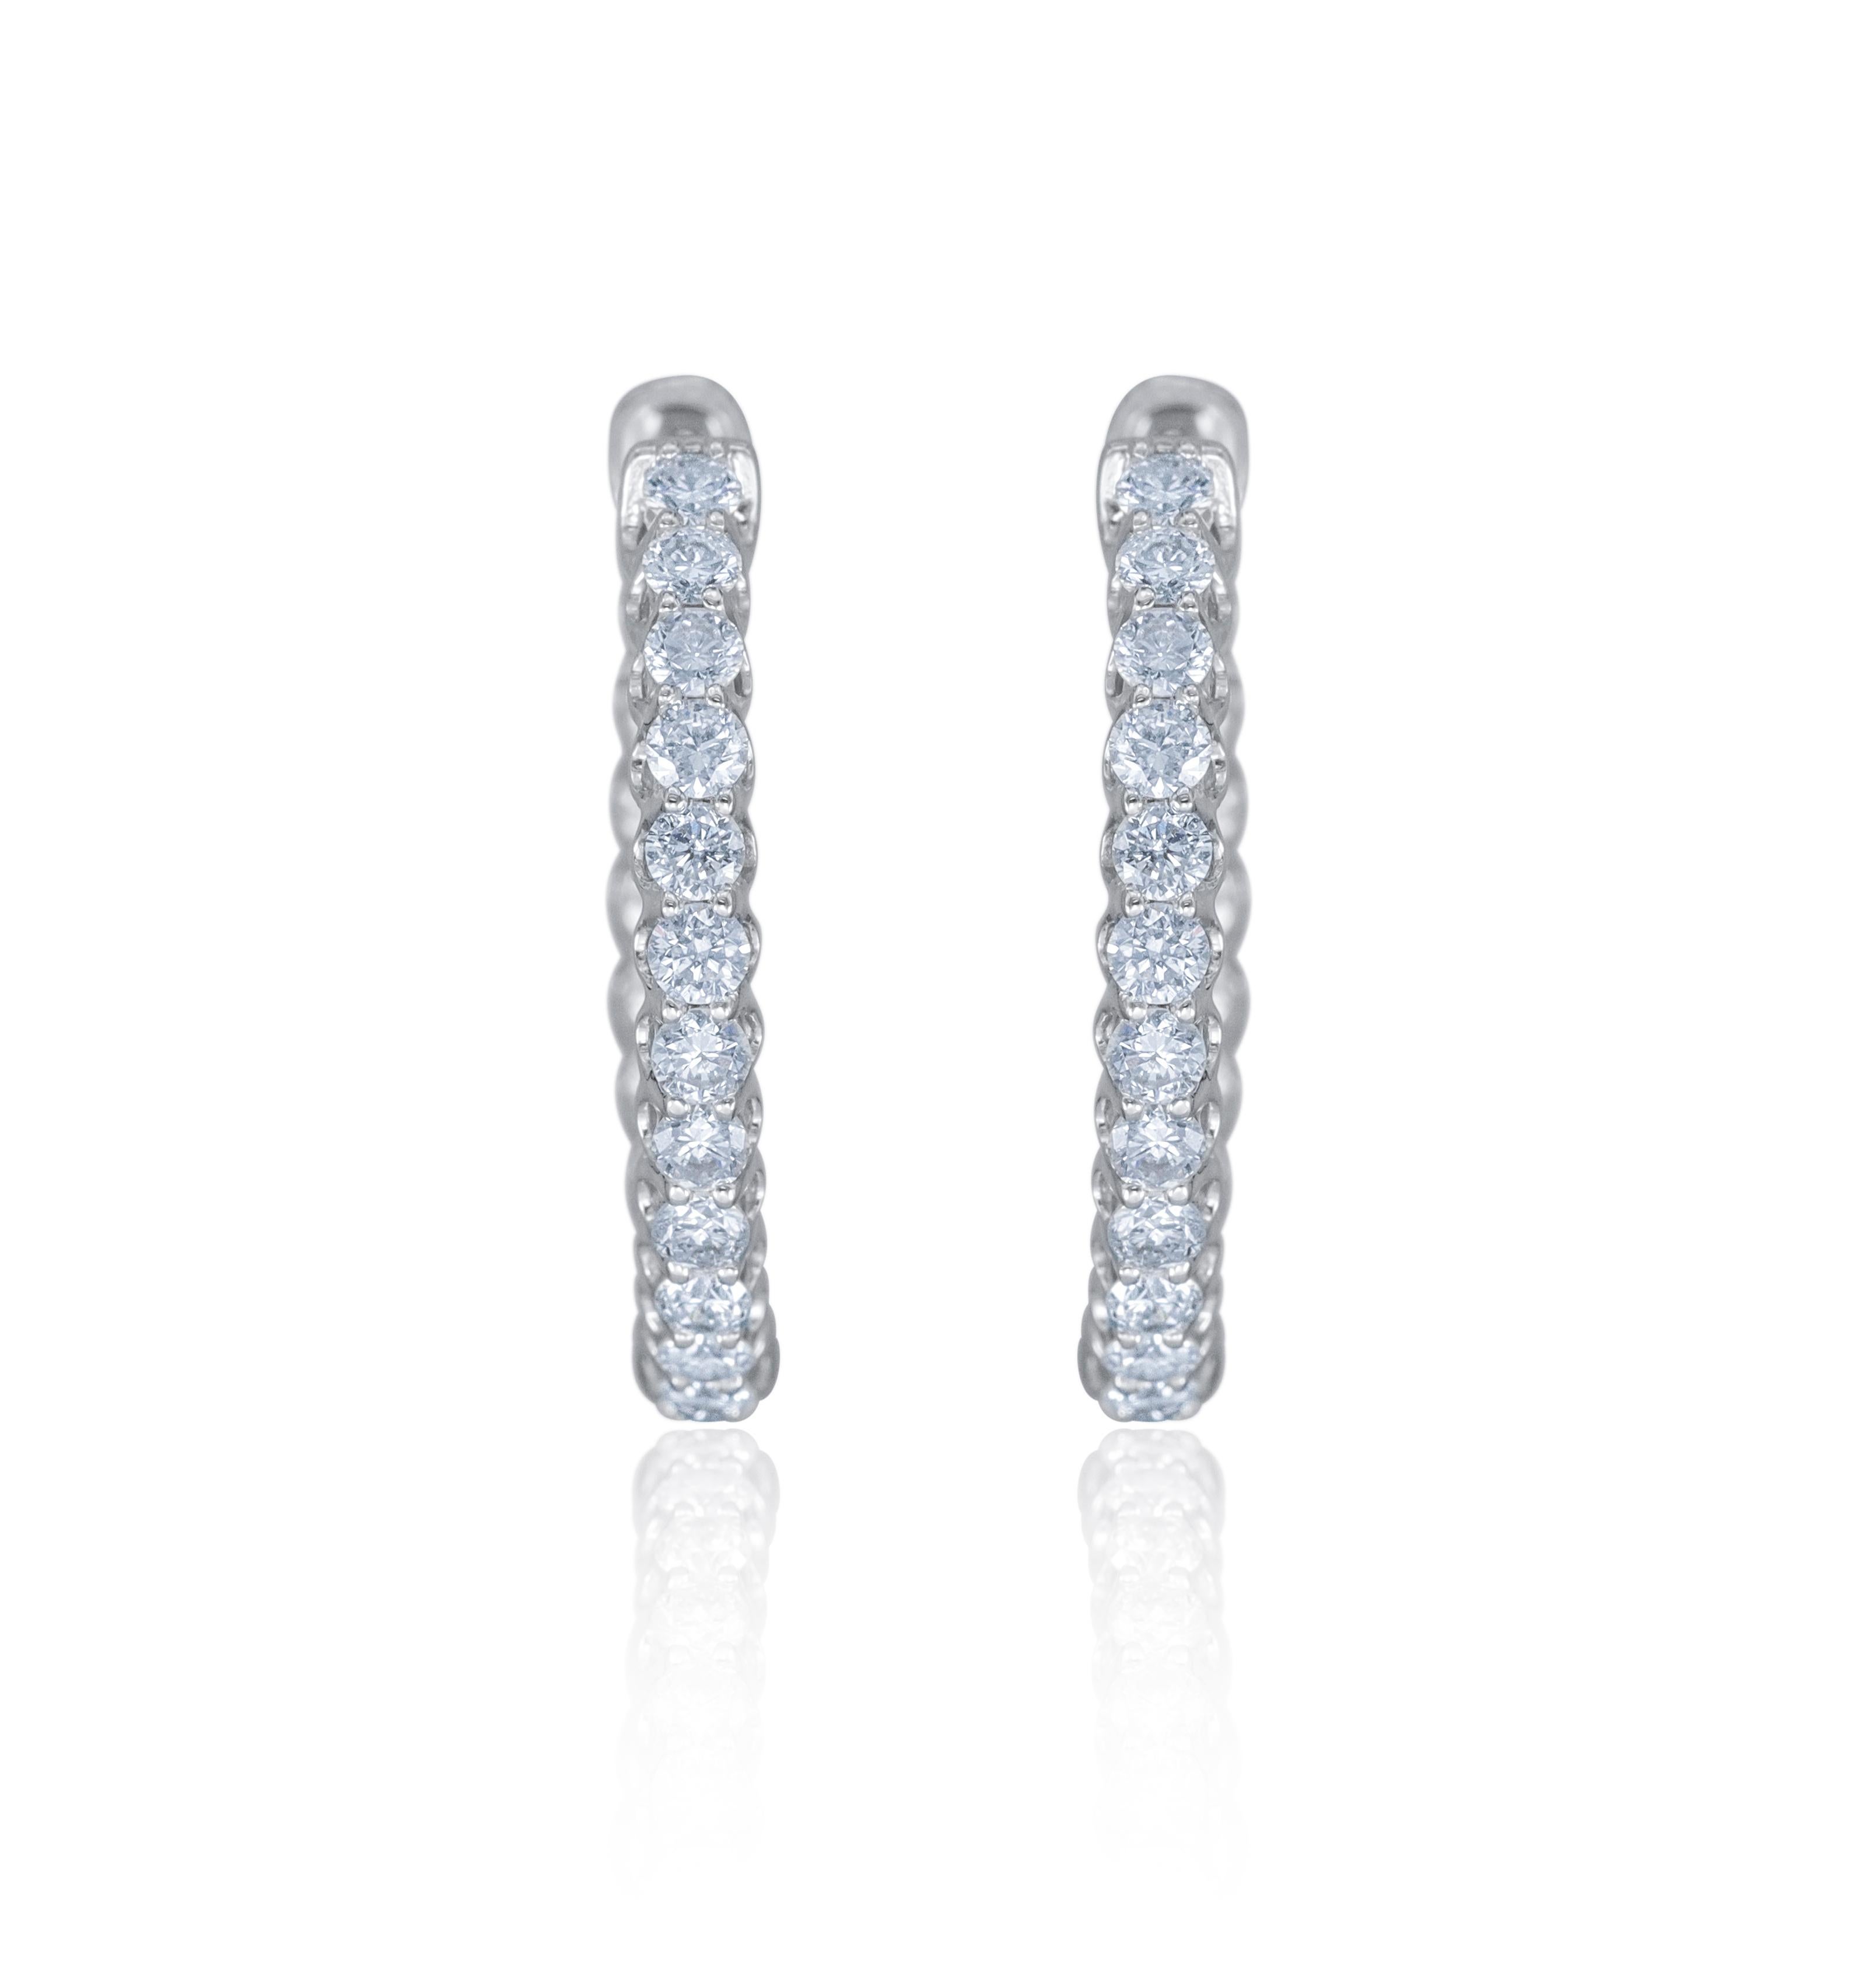 14K White Gold Diamond Earrings featuring 1.50 Carat T.W. of Natural Diamonds

Underline your look with this sharp 14K White Gold Diamond Earrings. High quality Diamonds. This Earrings will underline your exquisite look for any occasion.

. is a